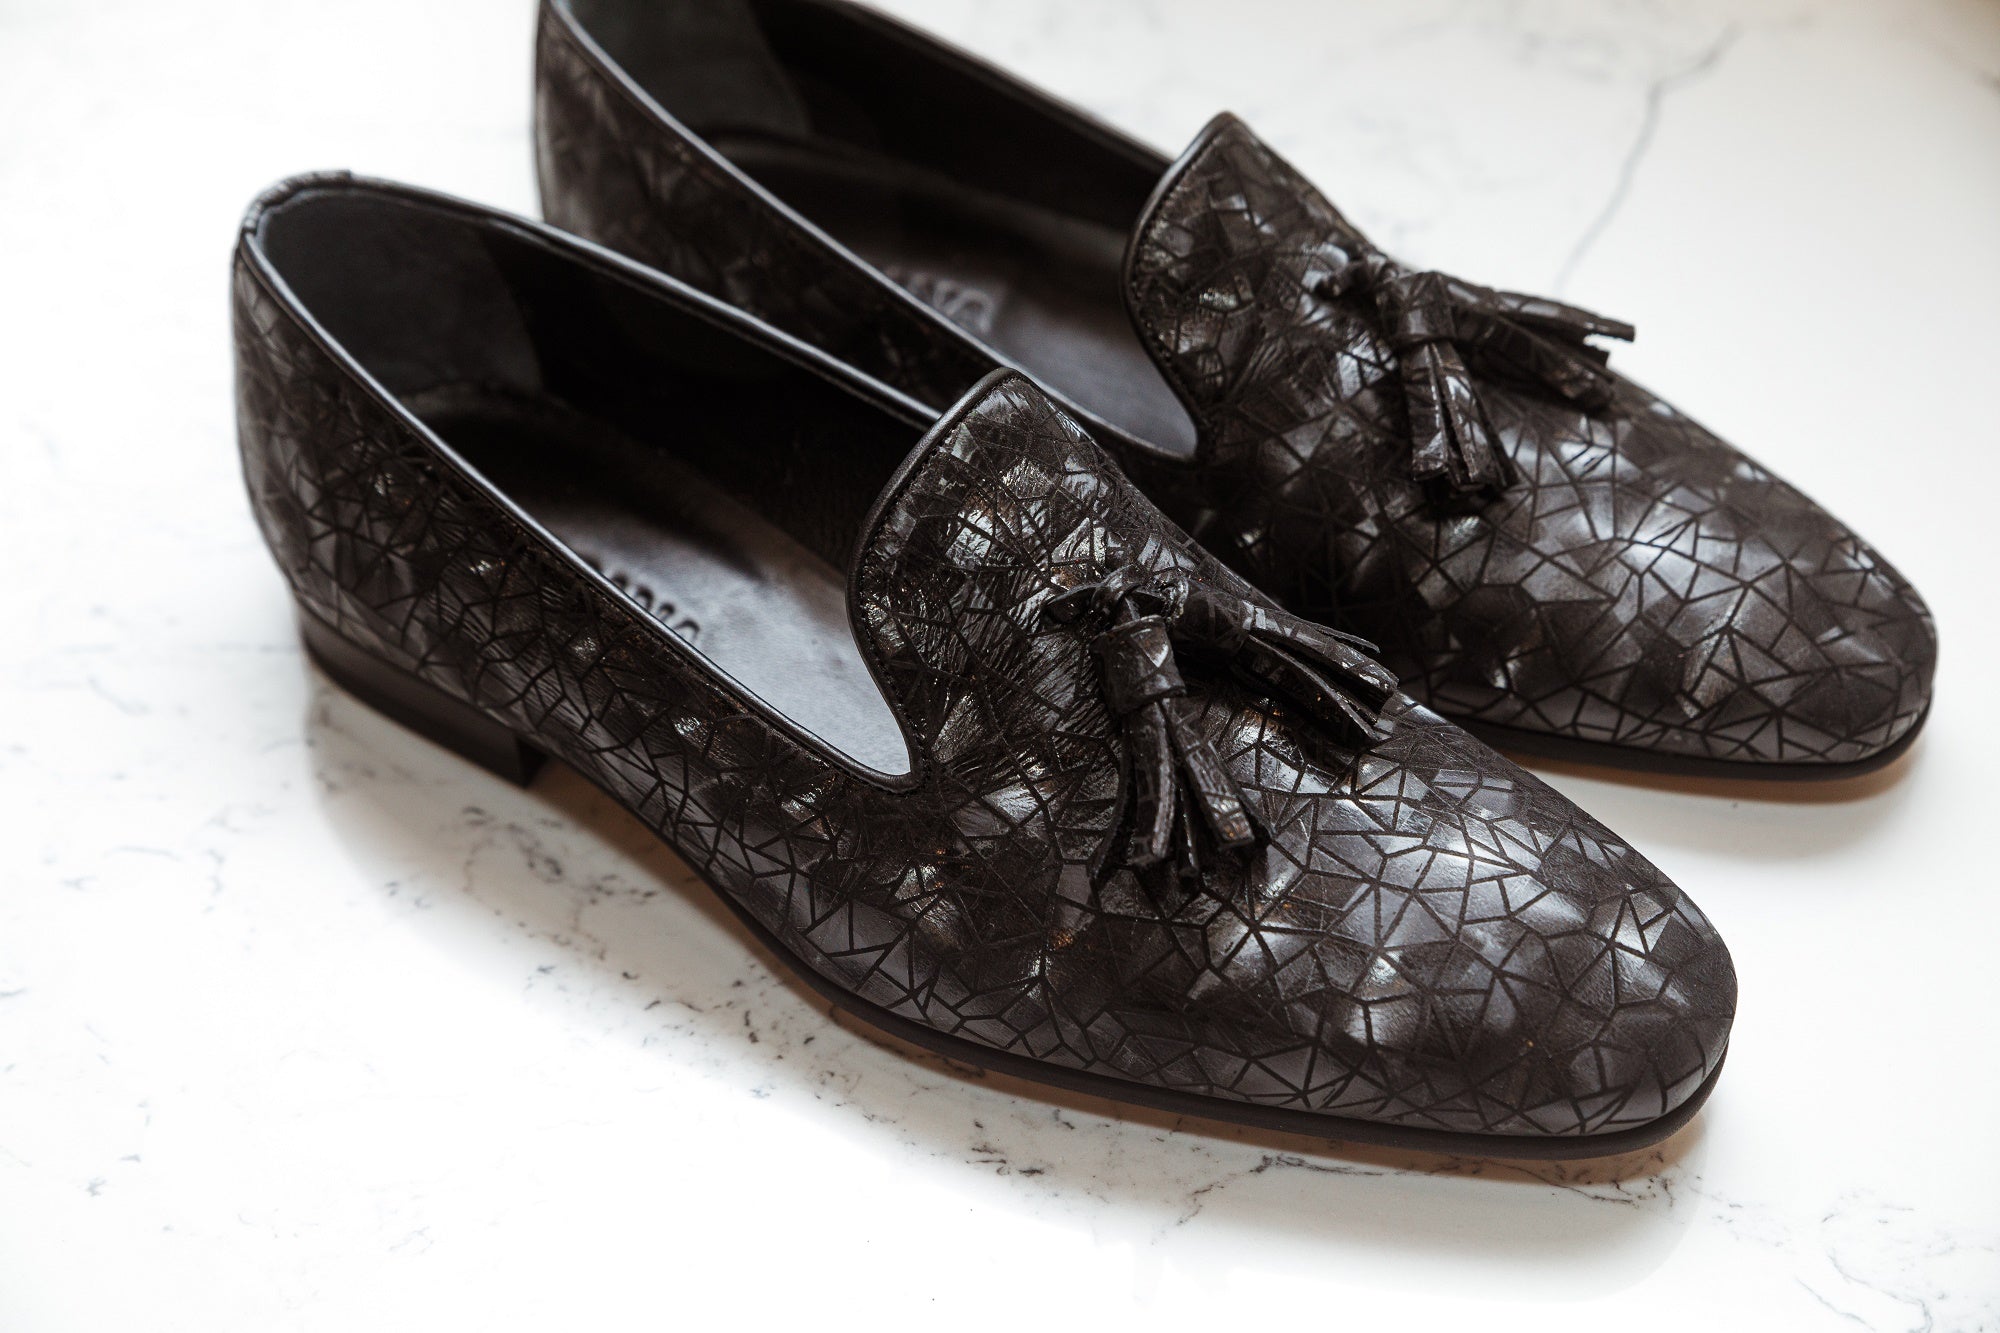 The Manuzi Loafers - Loafers by Urbbana